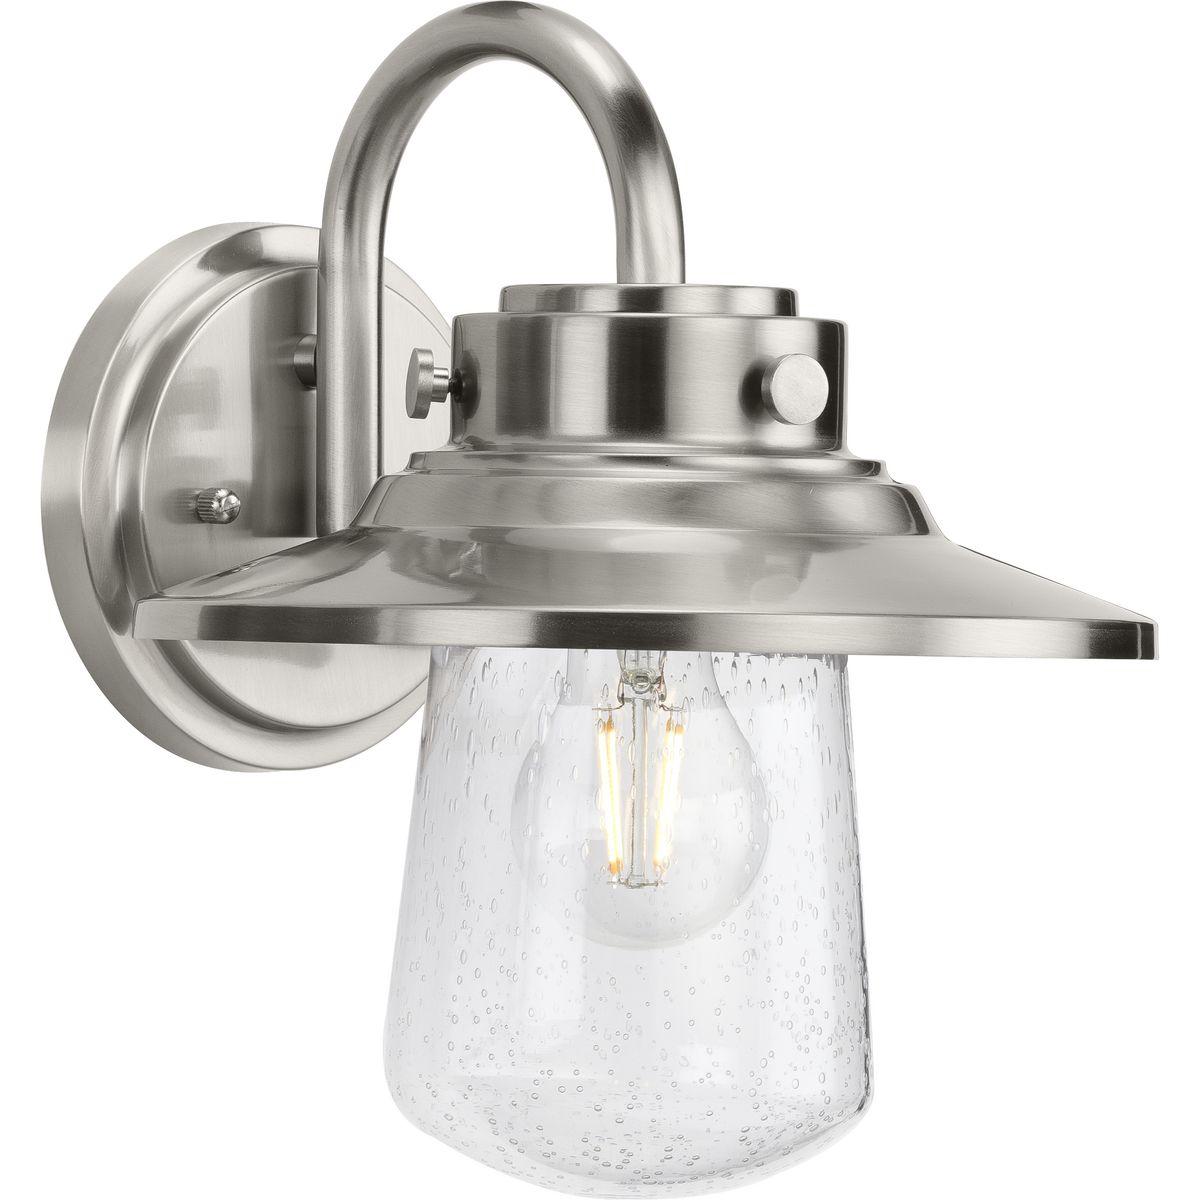 Hubbell P560263-135 Welcome family and friends home with the Tremont Collection 1-Light Clear Seeded Glass Stainless Steel Industrial Outdoor Medium Wall Lantern Light. A light source glows from within a clear seeded glass shade reminiscent of raindrops on a window after a s